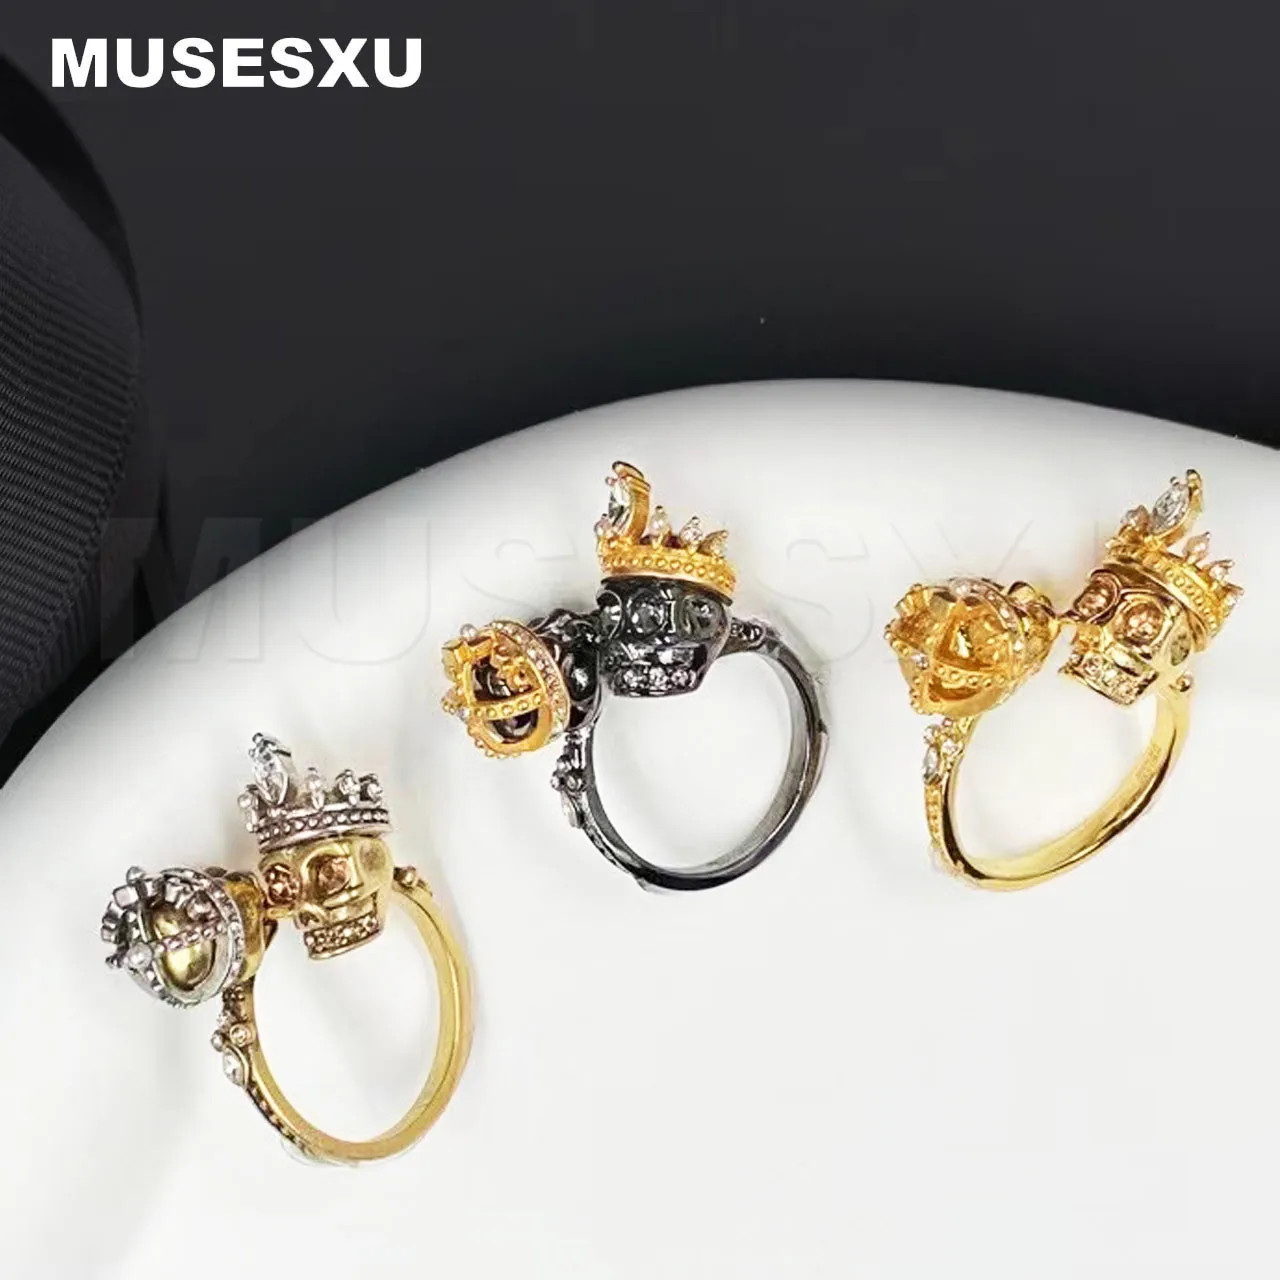 2022 Jewelry & Accessories Luxury Brand  Skeleton Of King And Queen With Crown Open Ring For Men's & Women's Party Gifts